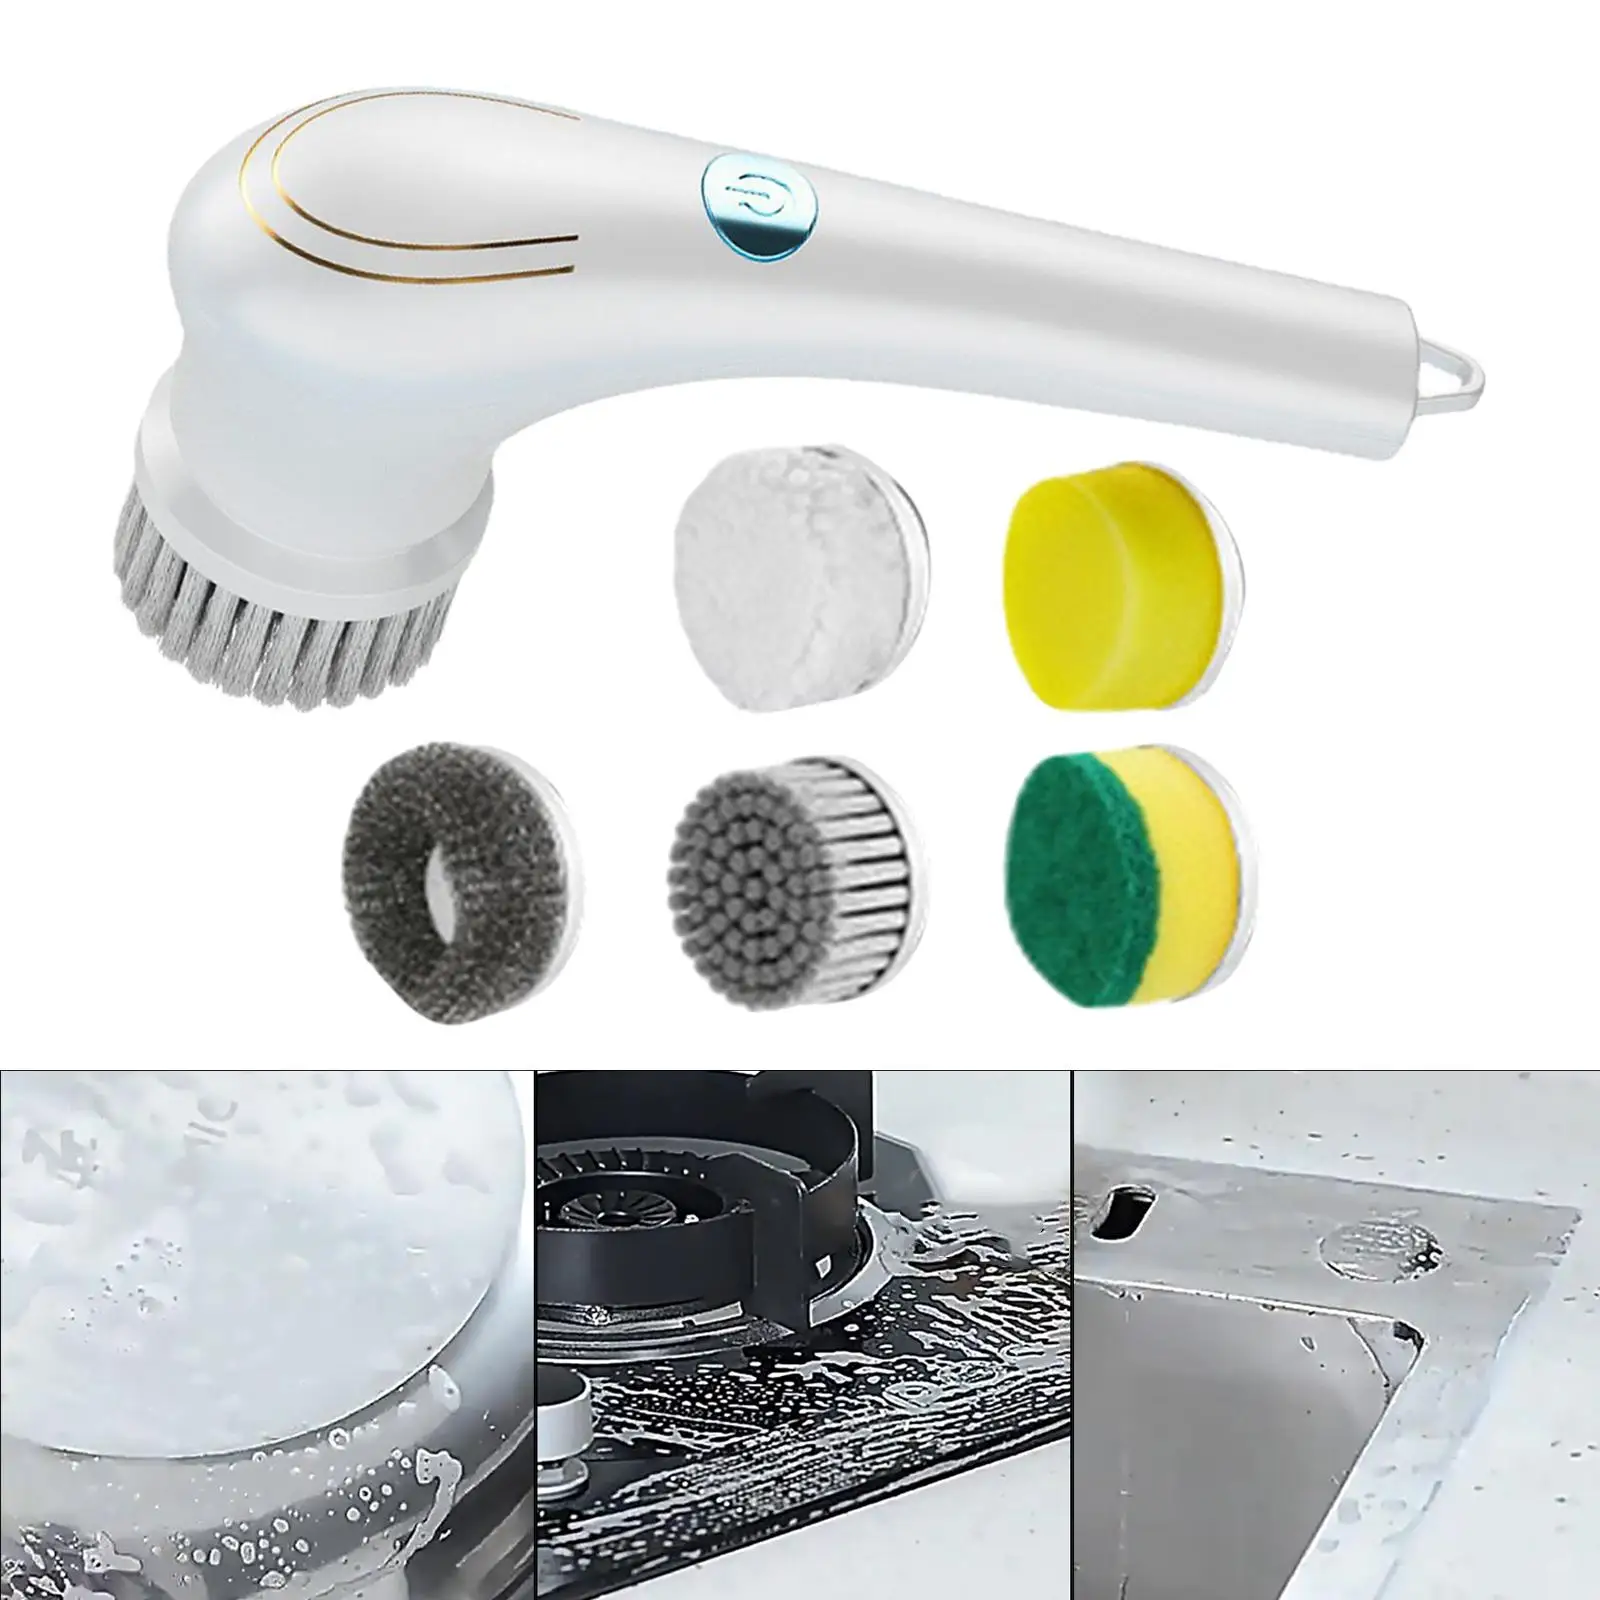 Cordless Electric Scrubber Handheld with 5 Brush Heads for Tile Bathtub Sink